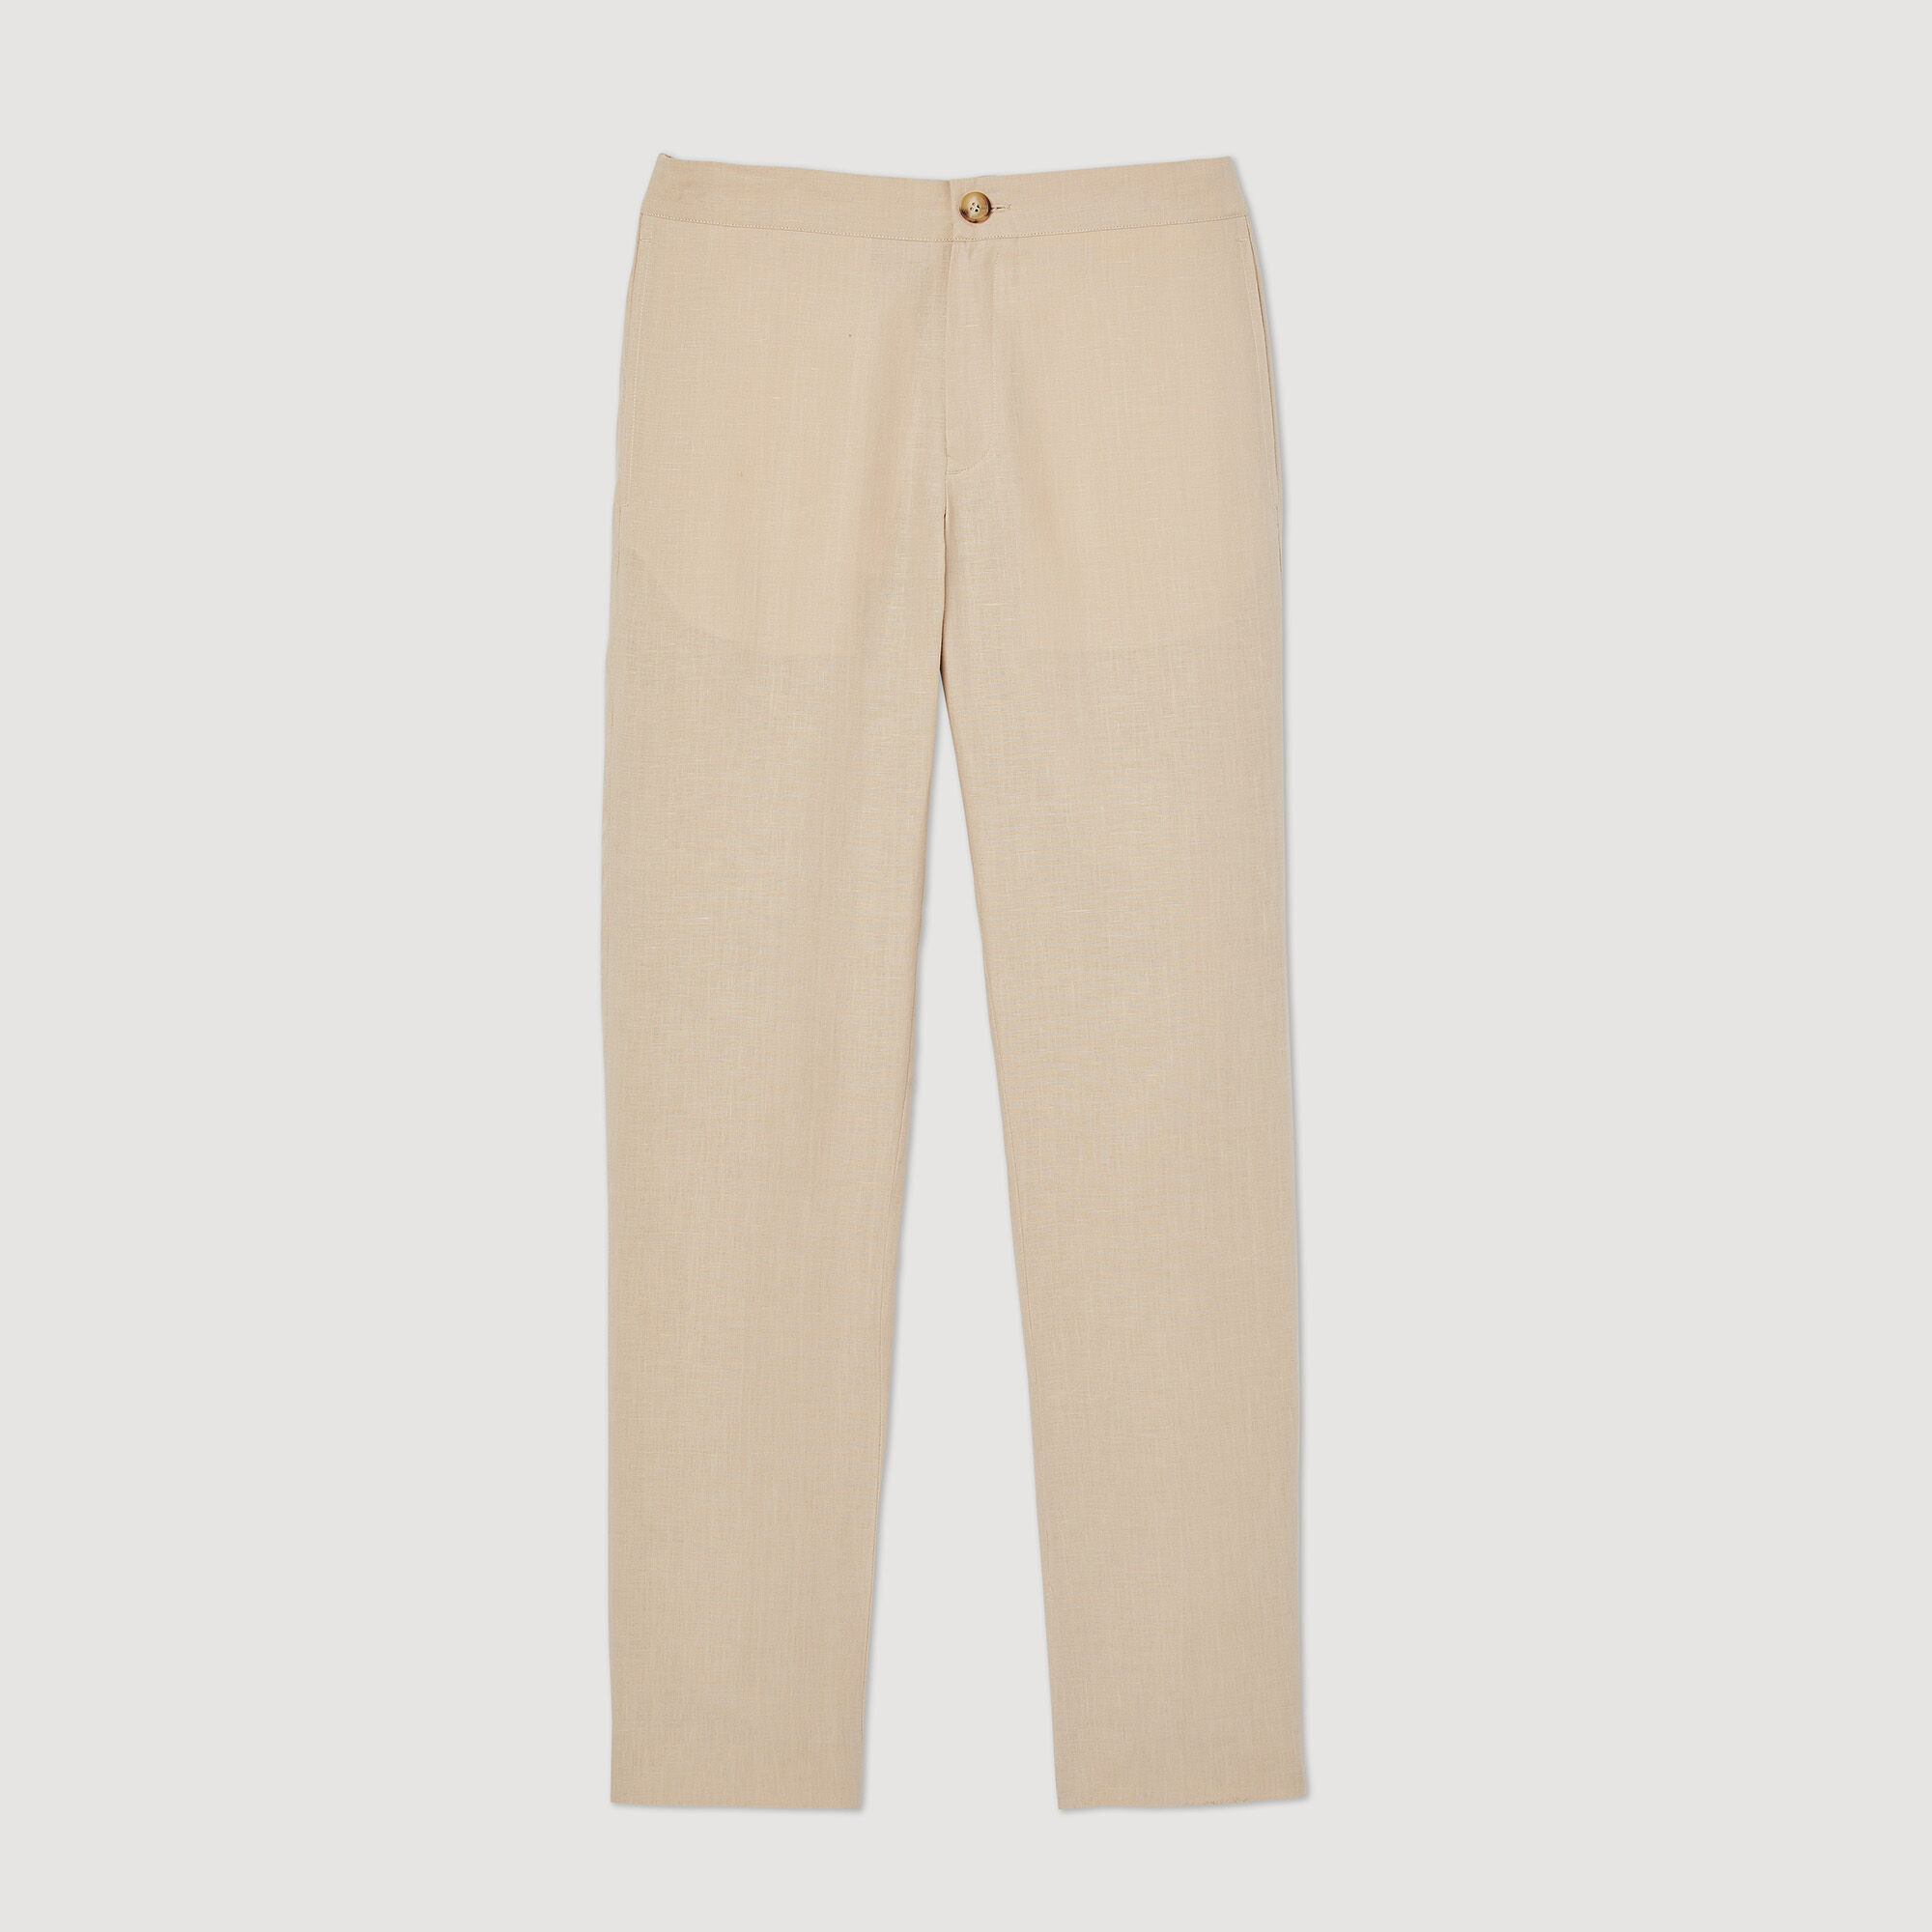 UNIQLO cotton linen pants, Women's Fashion, Bottoms, Other Bottoms on  Carousell